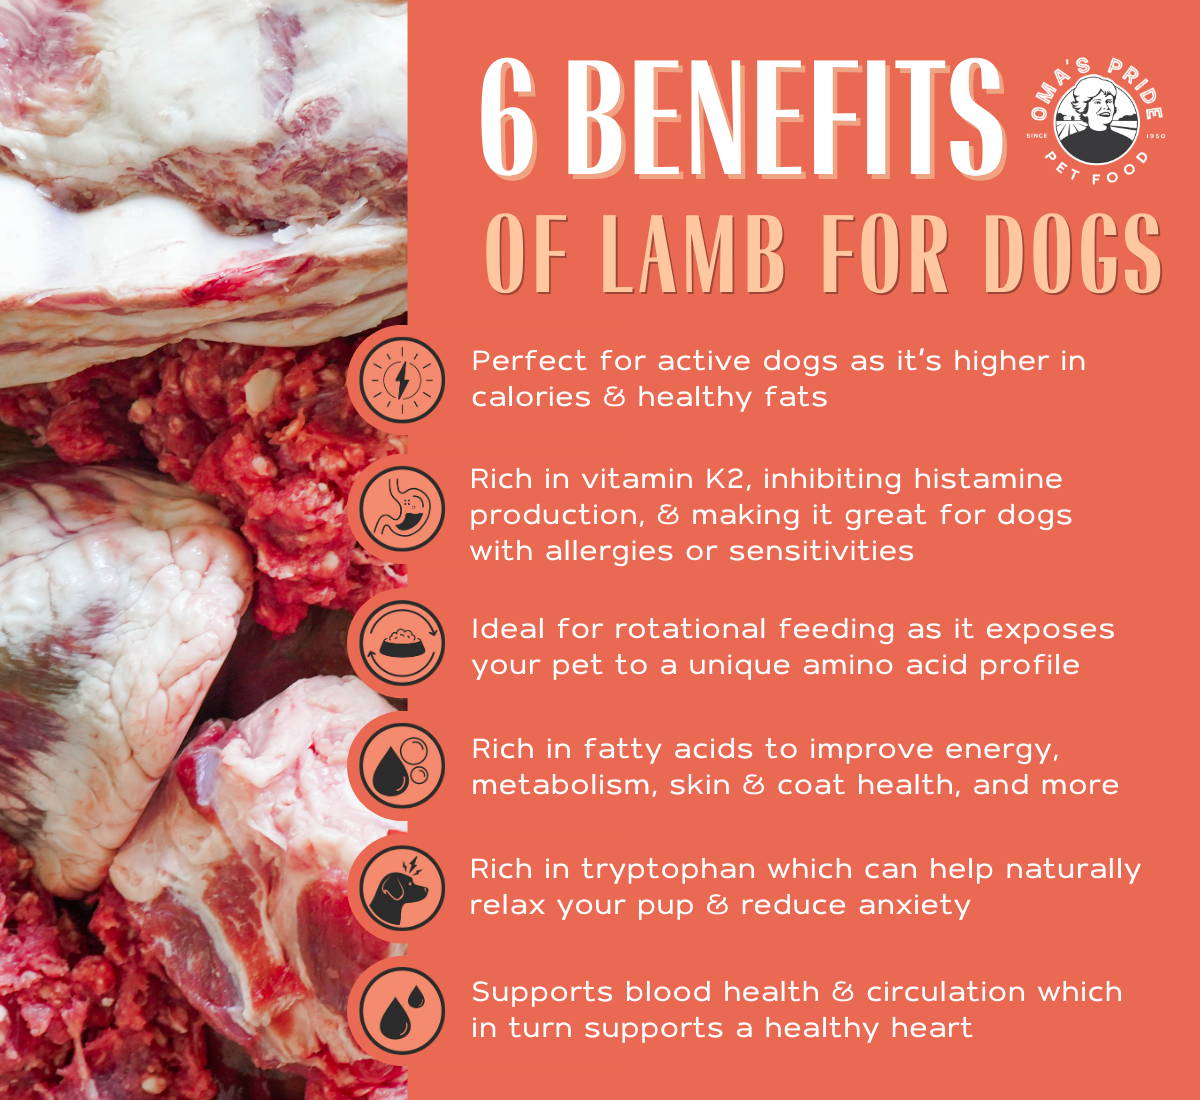 List of 6 benefits of lamb for dogs.